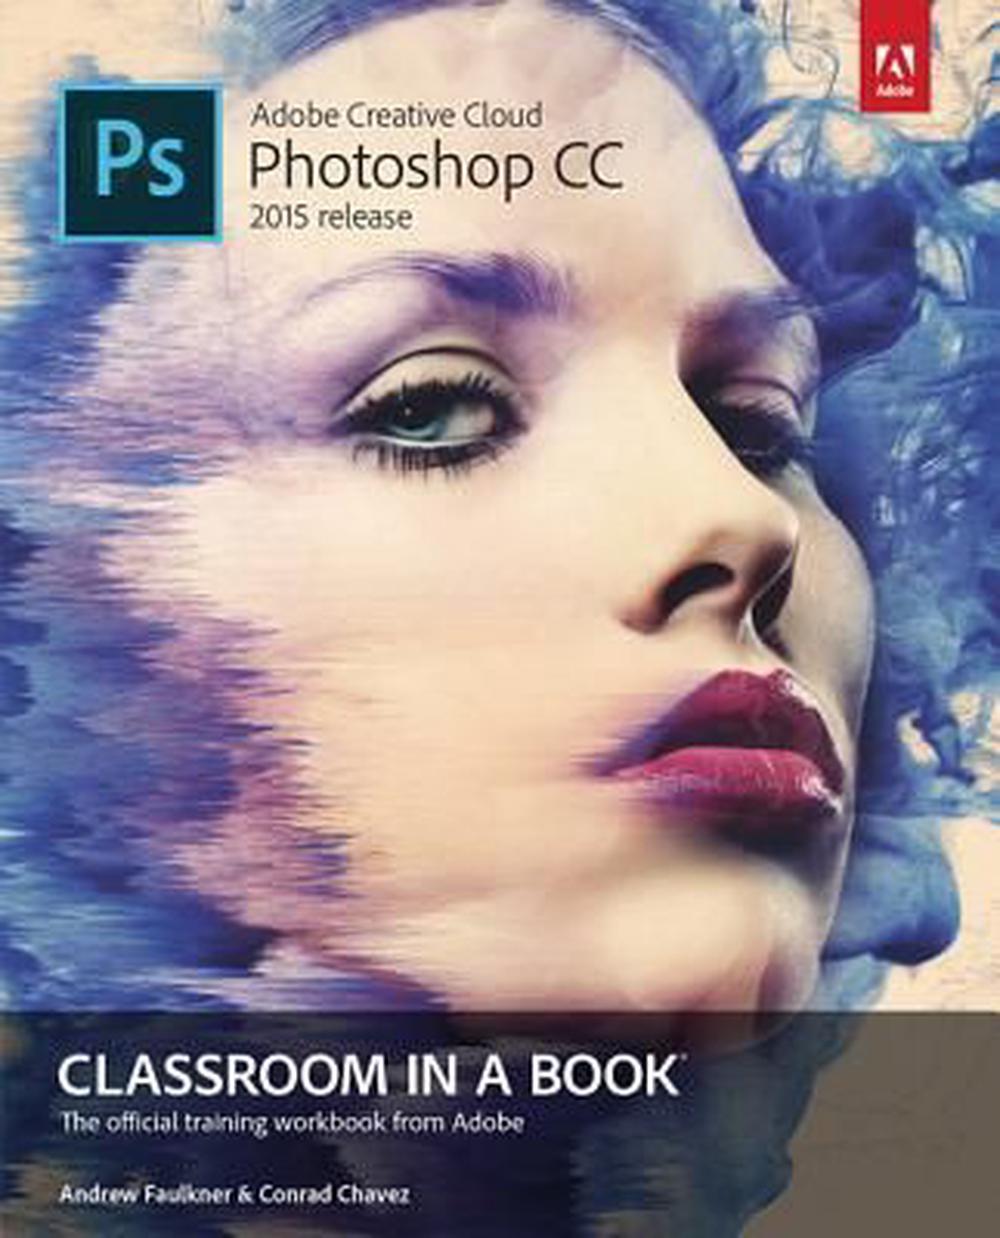 adobe photoshop cc classroom in a book 2017 pdf free download